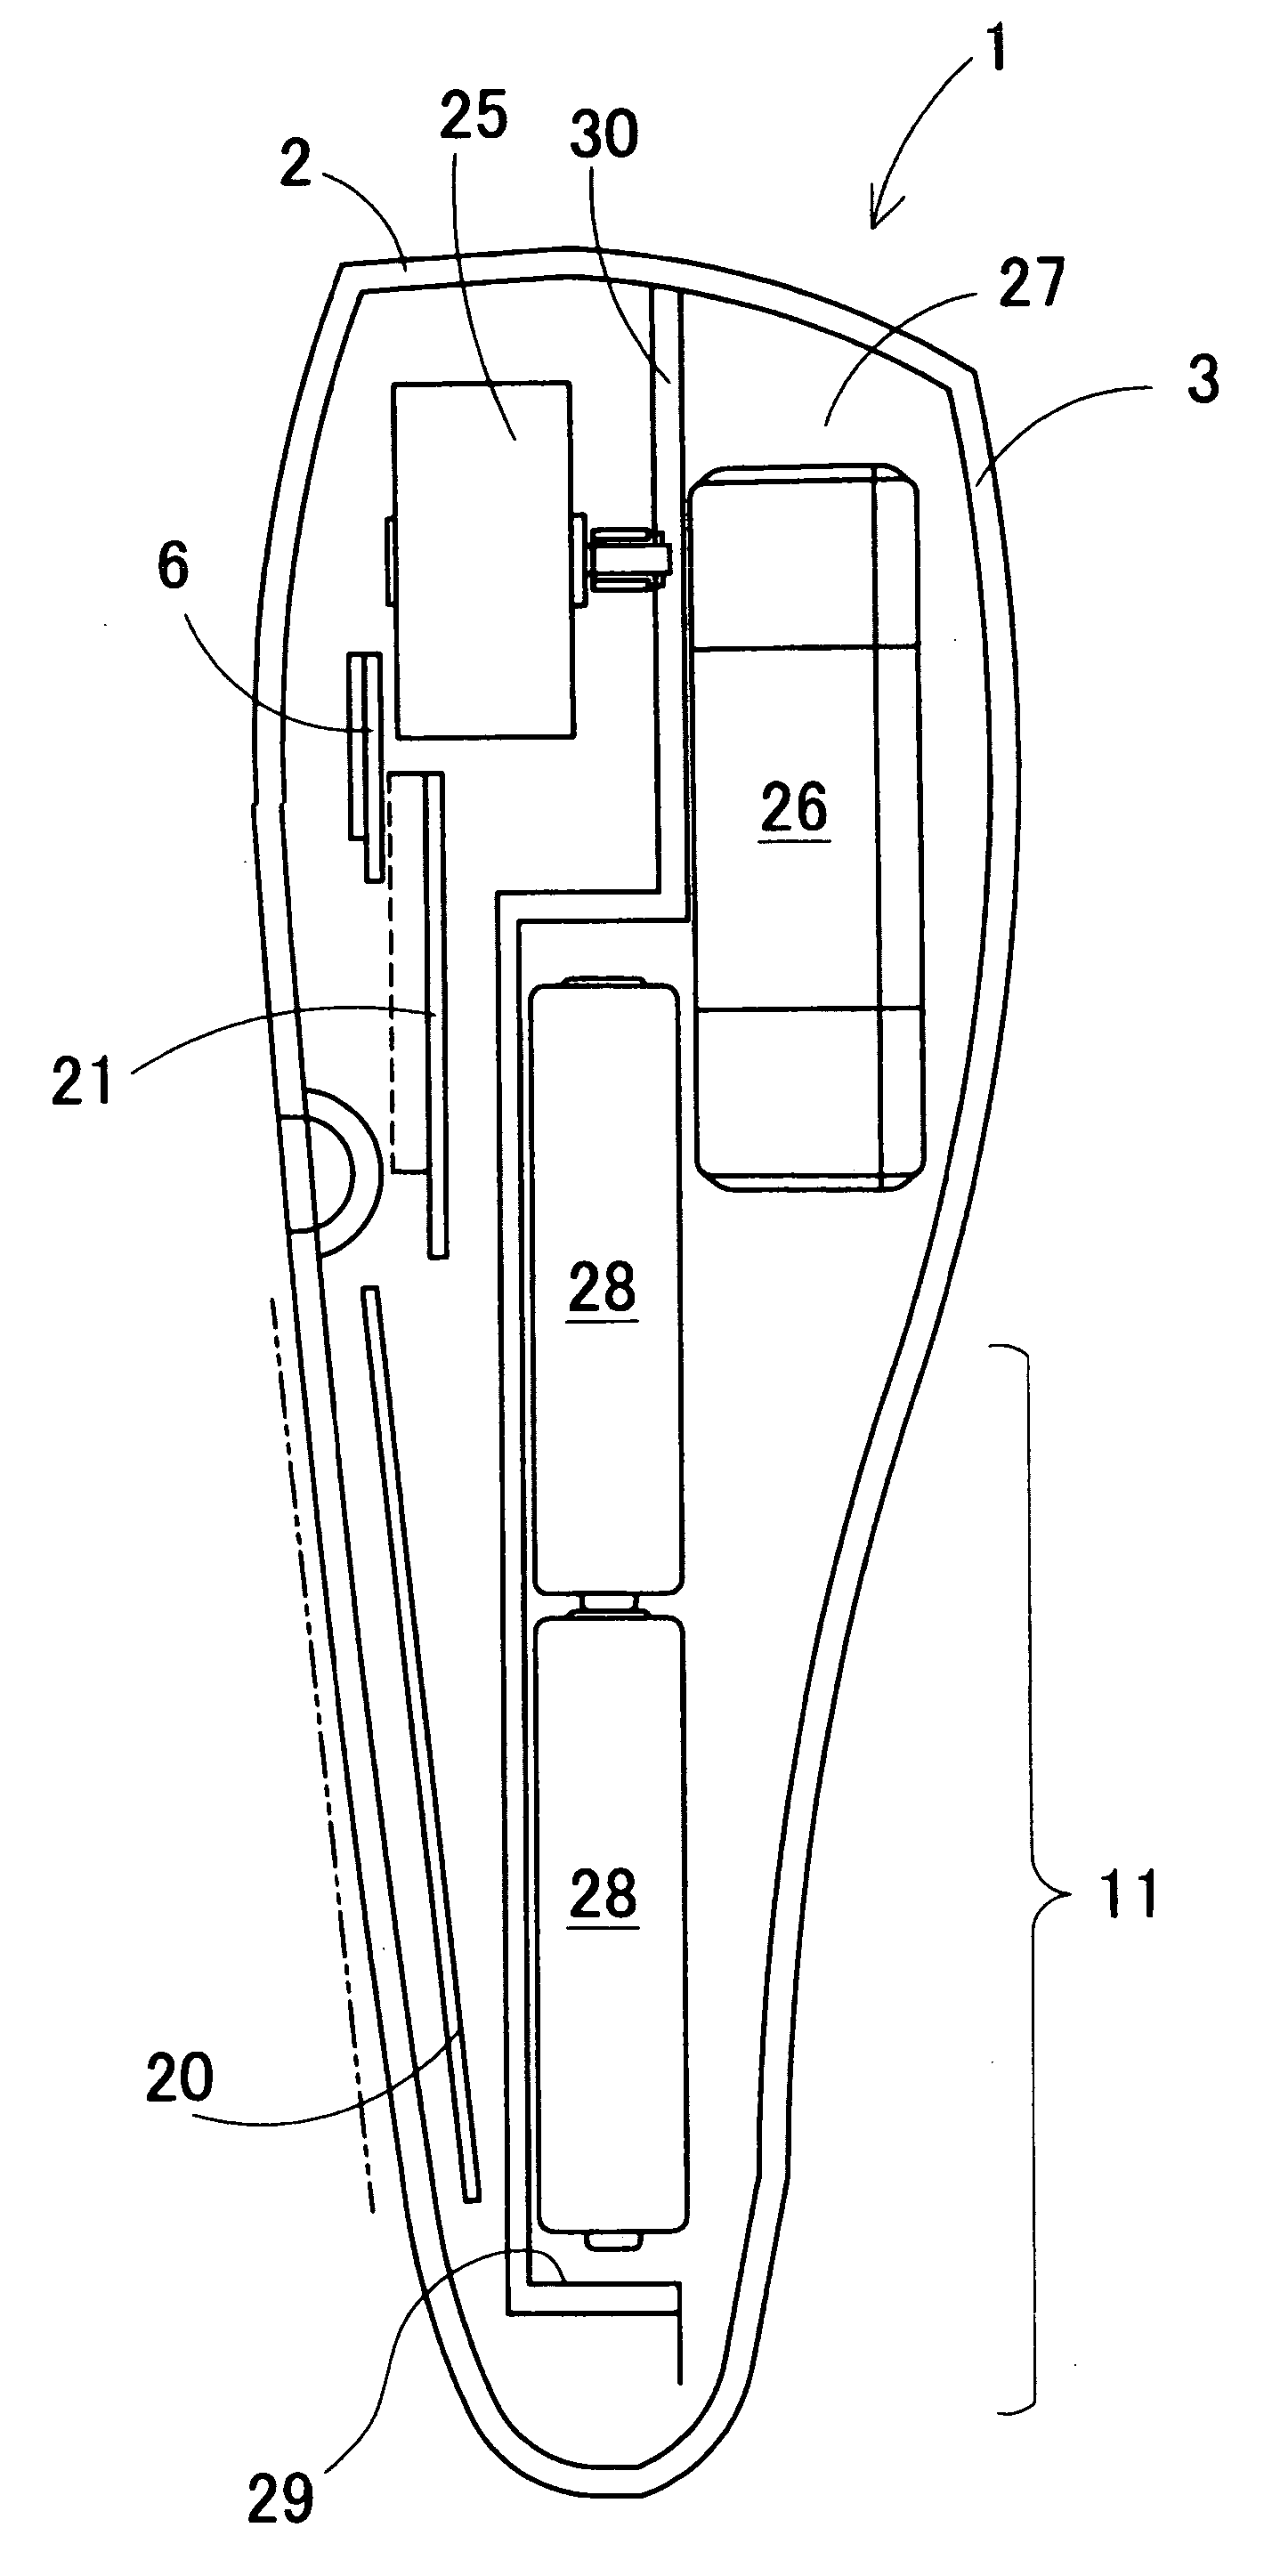 Tape printing apparatus with tape cassette guide members